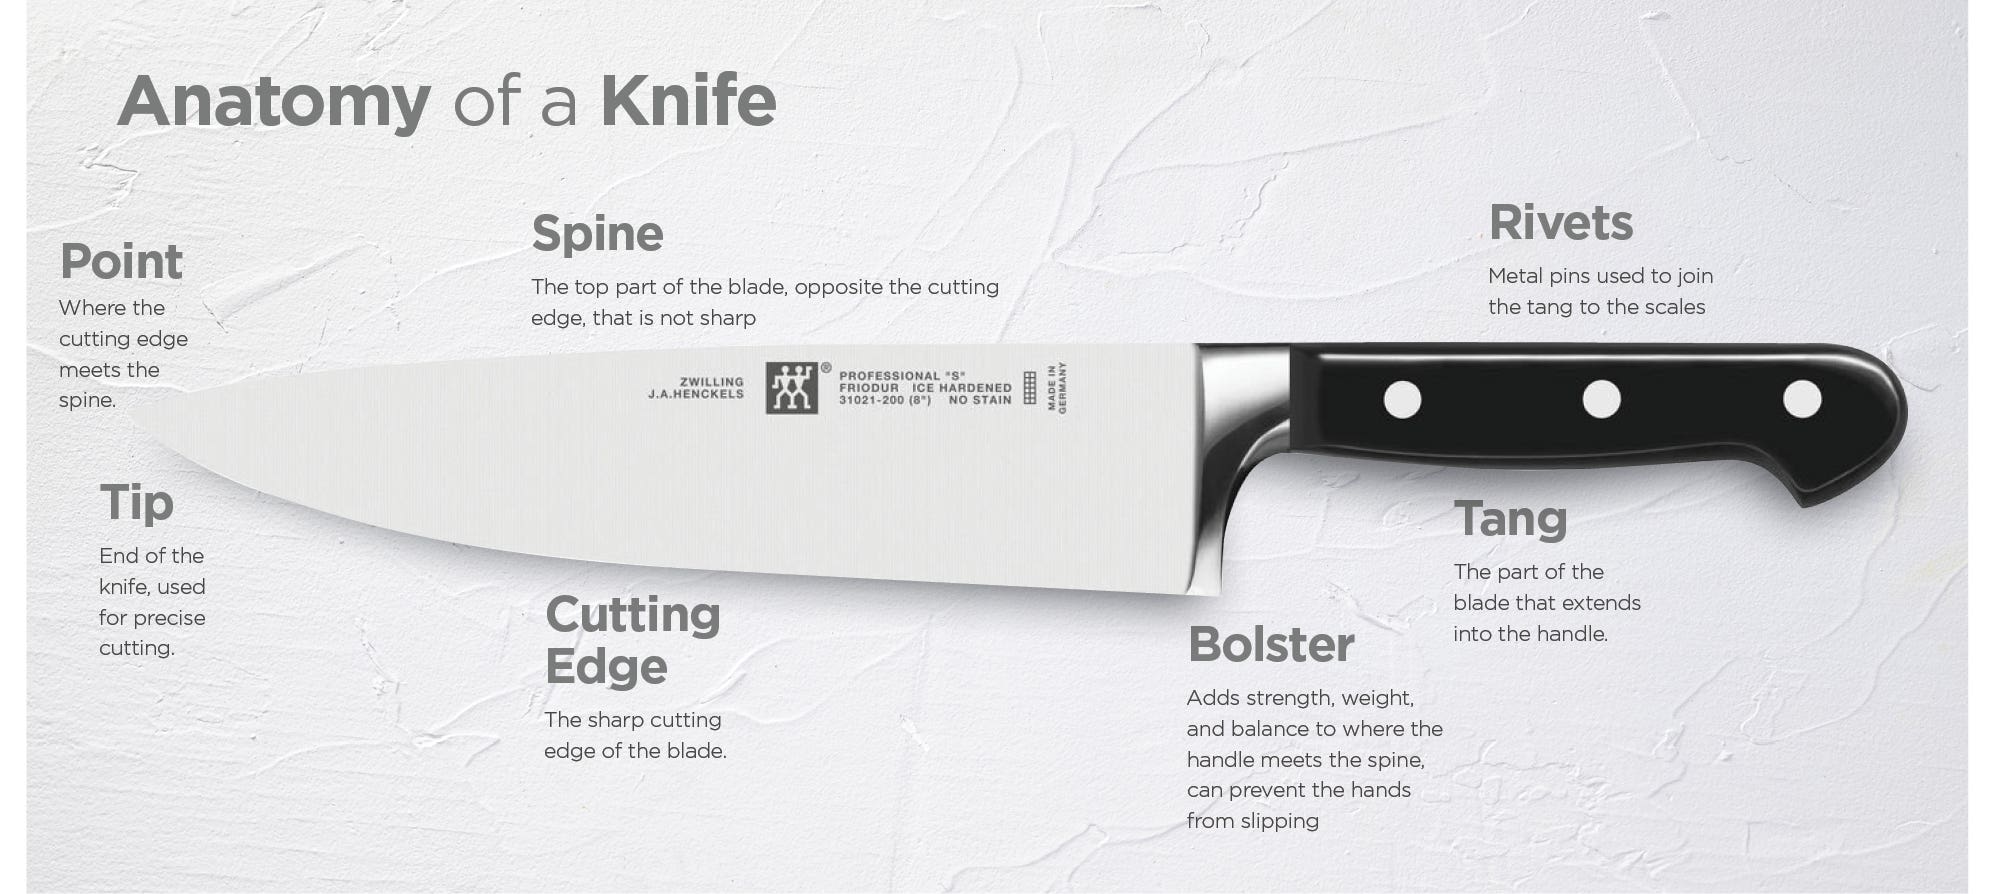 Anatomy of a Knife for mobile